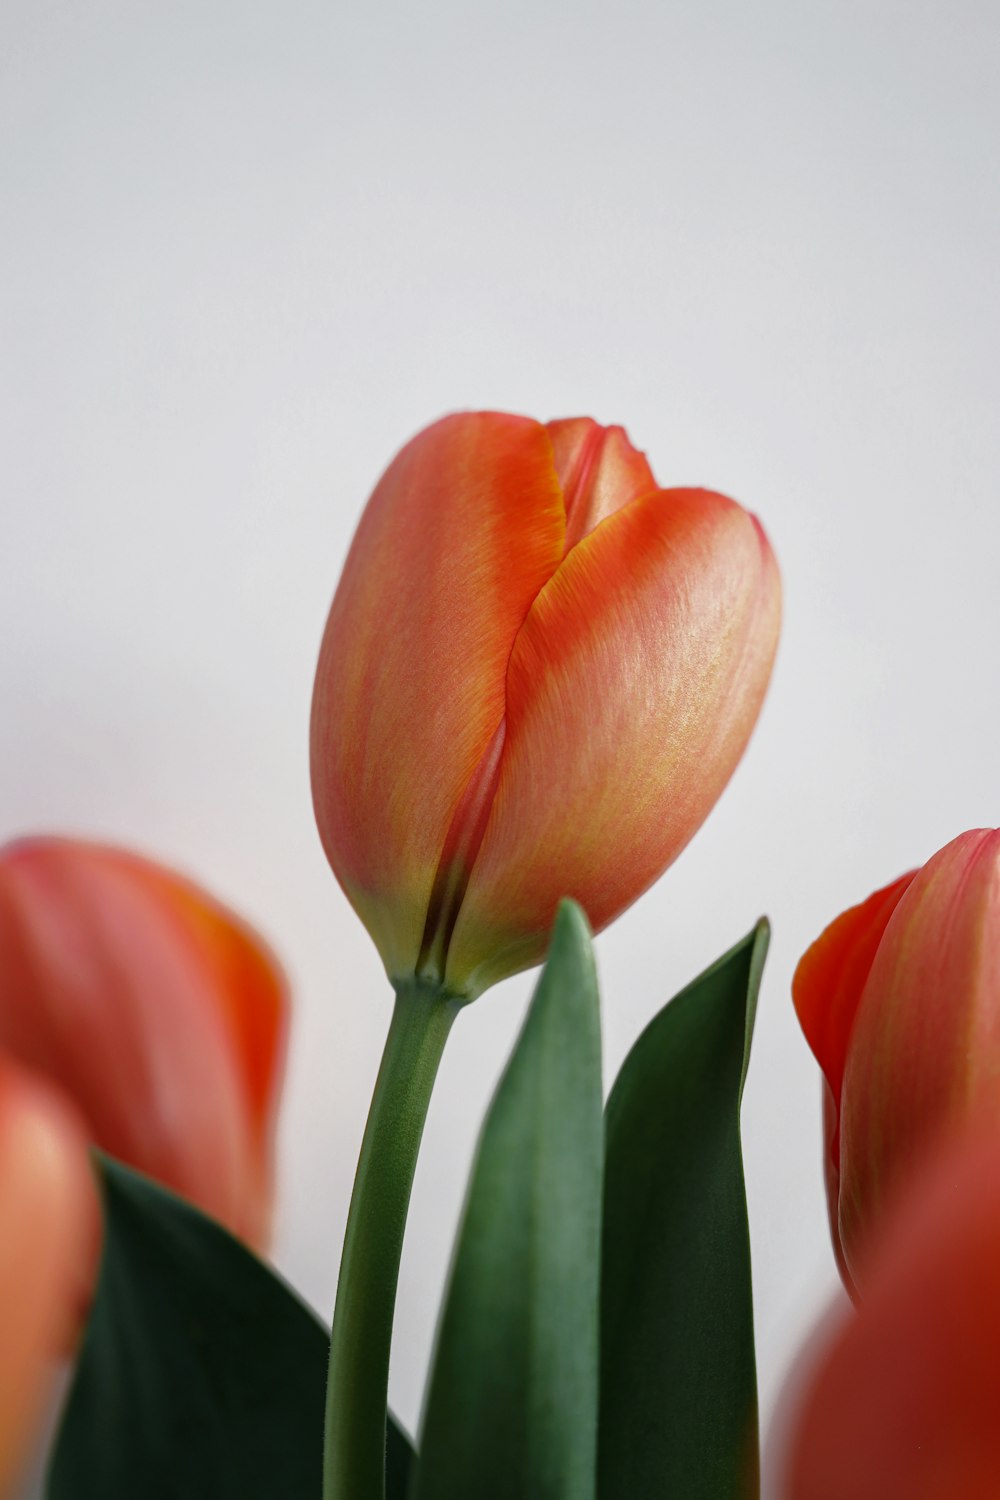 a group of orange tulips with green leaves